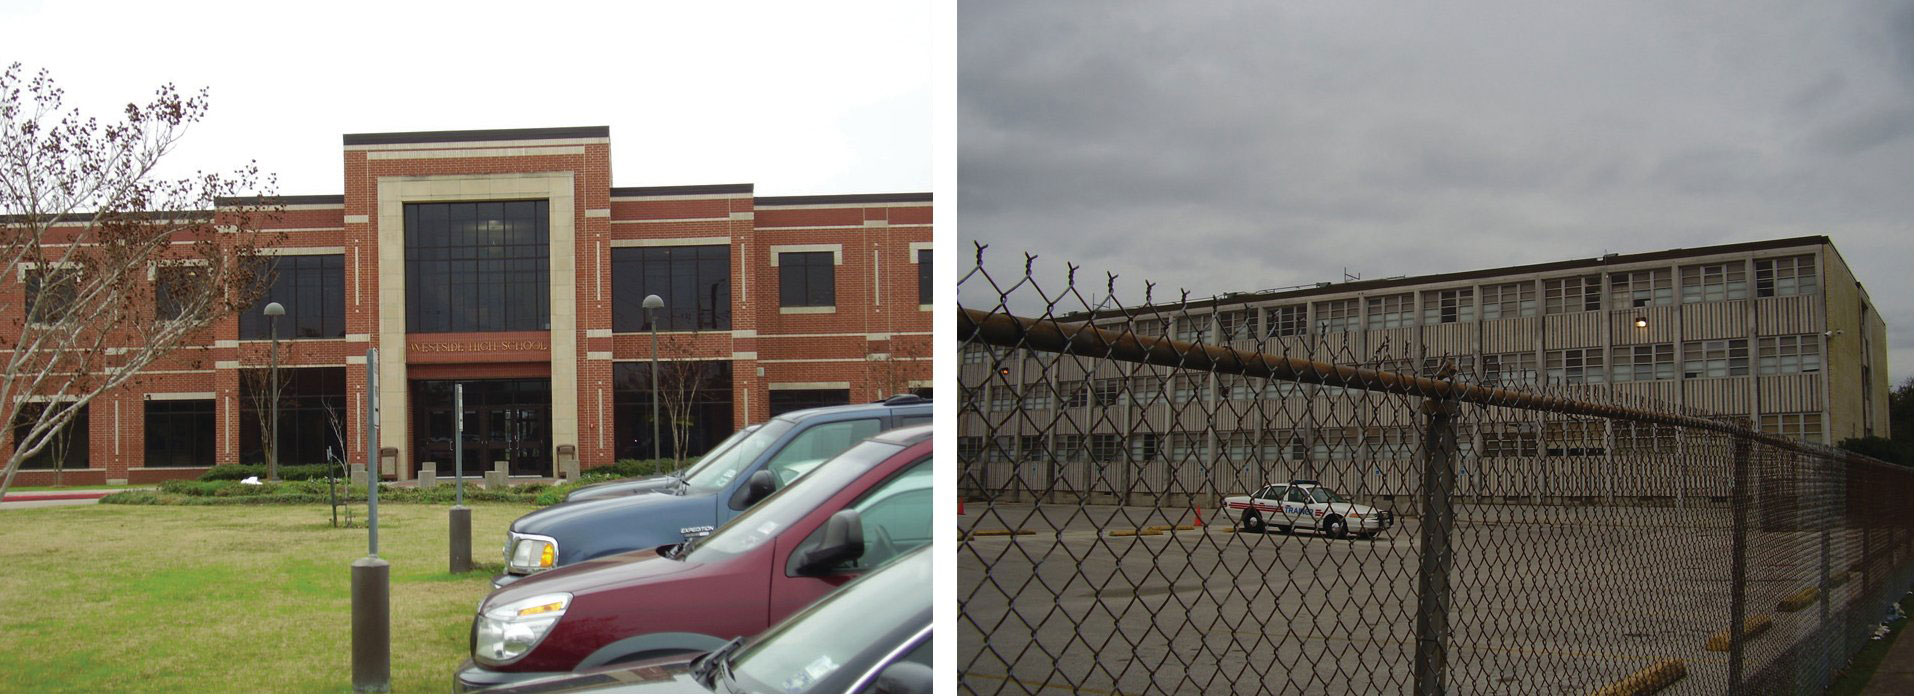 Westside High School in Houston (a very nicely established school) and Lee High School in Houston (surrounded by a fence)